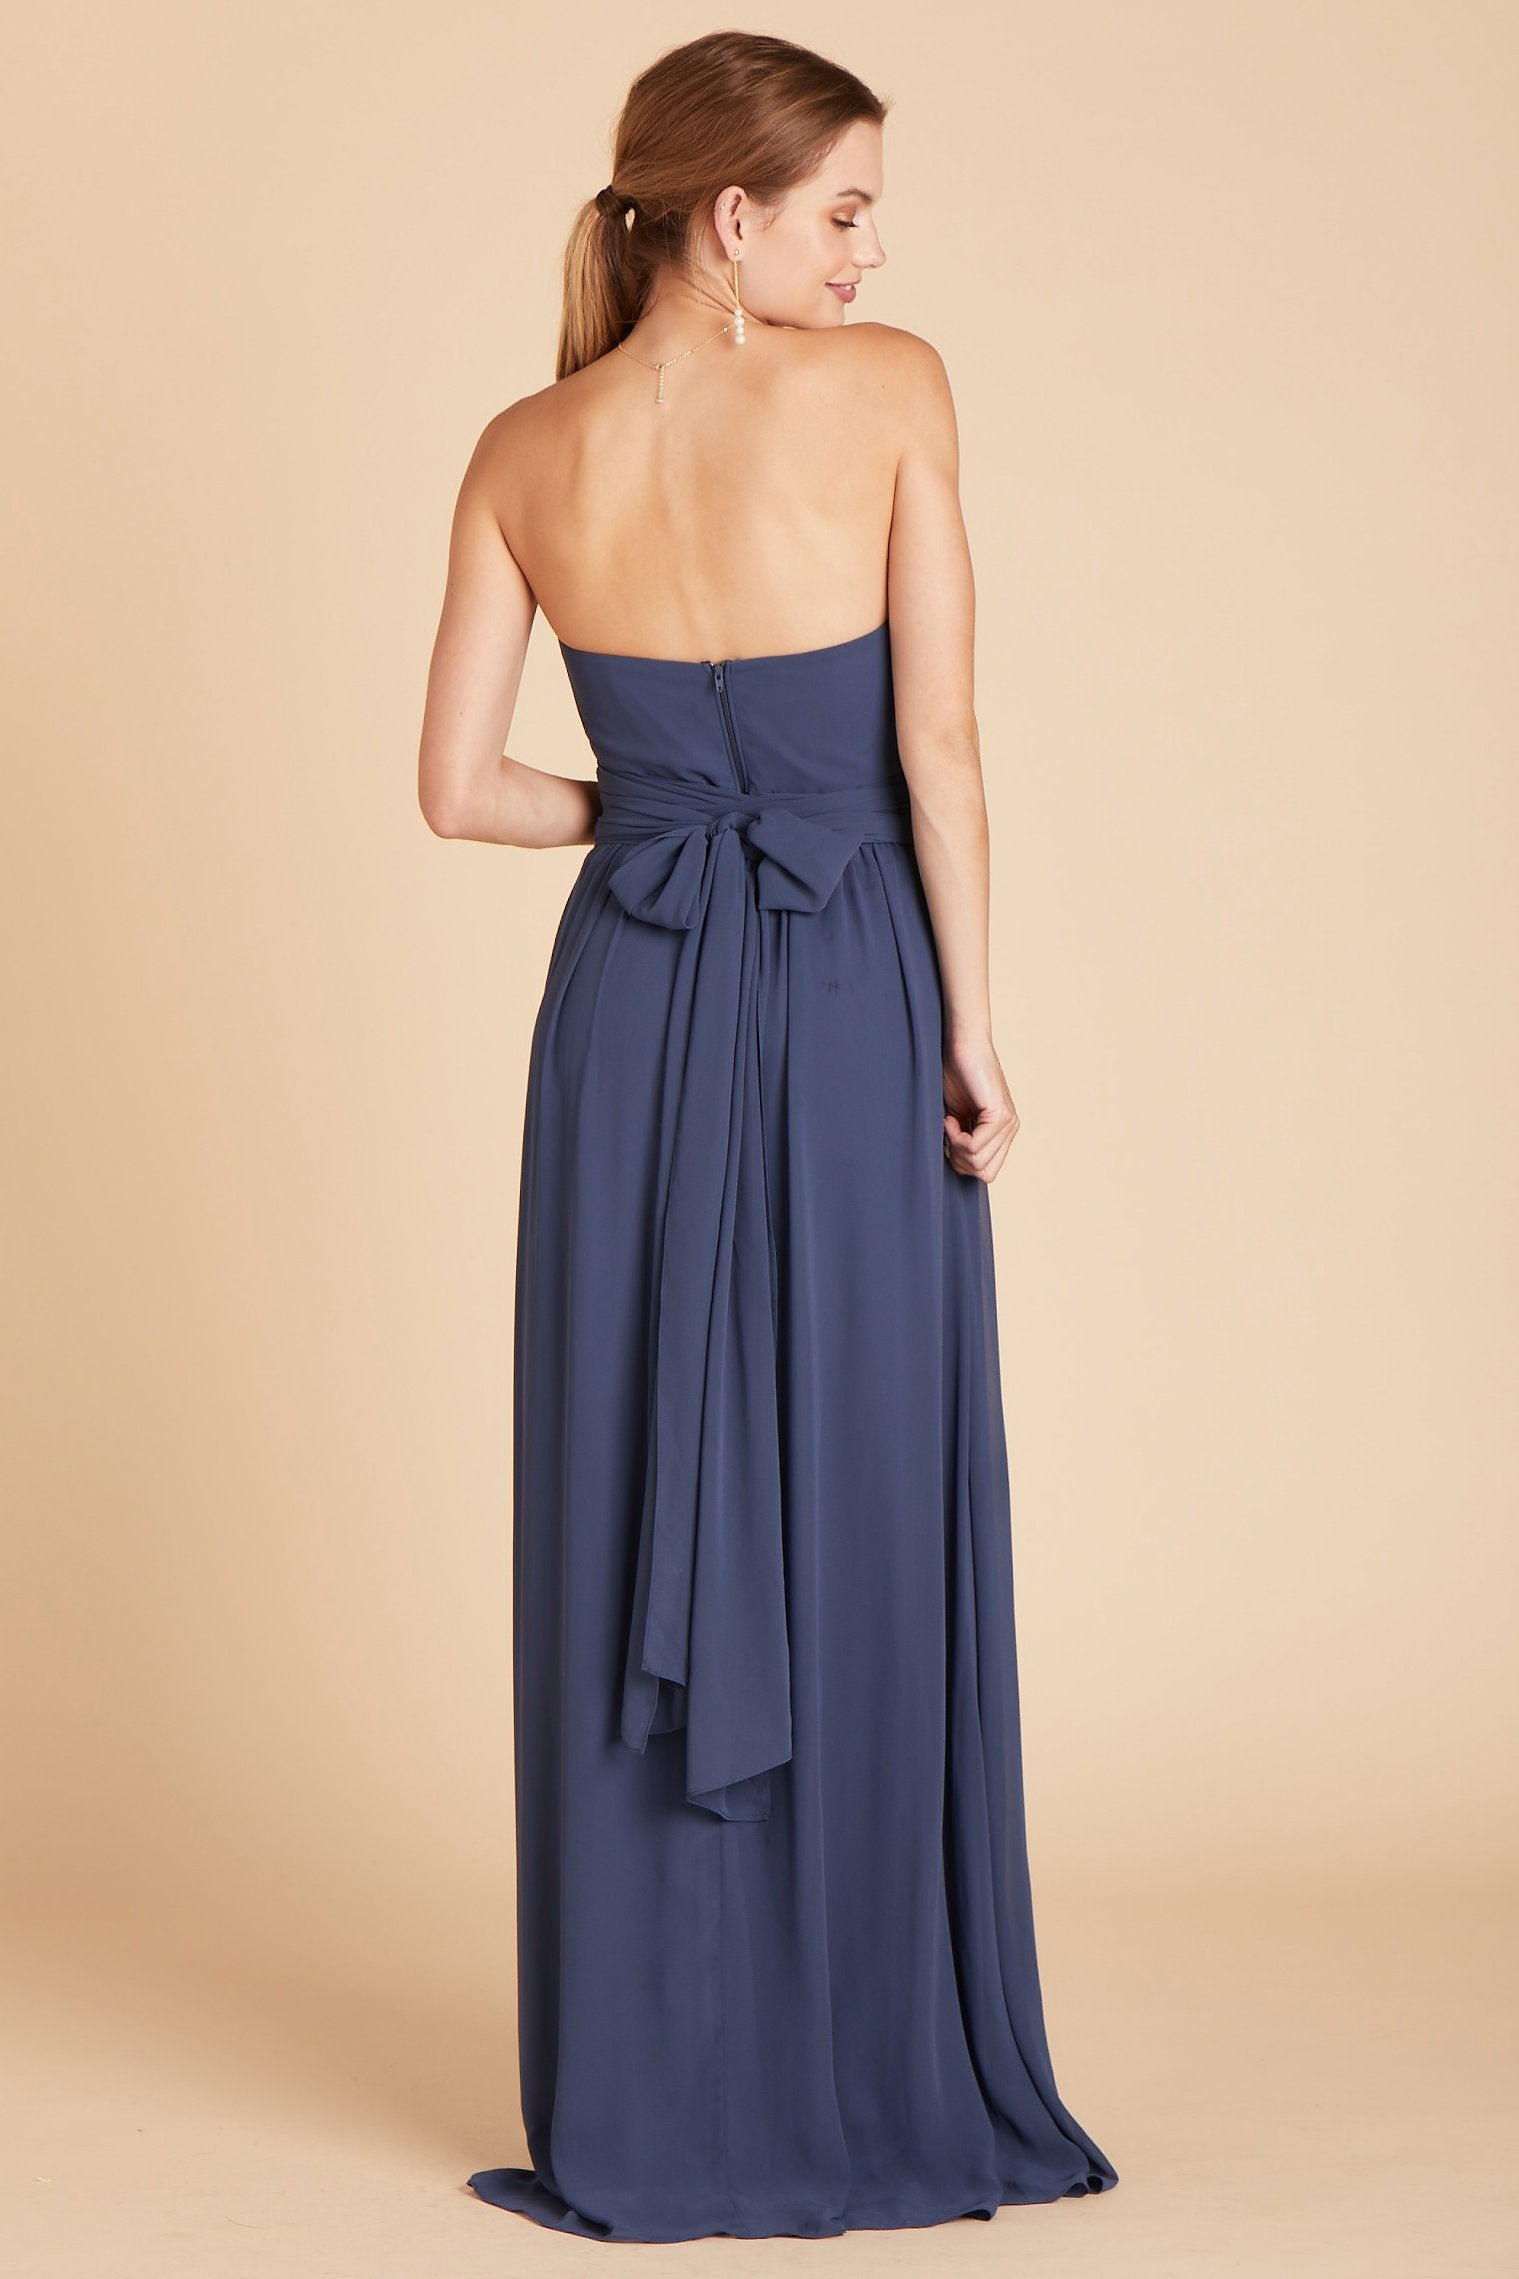 Grace convertible bridesmaid dress in slate blue chiffon by Birdy Grey, back view